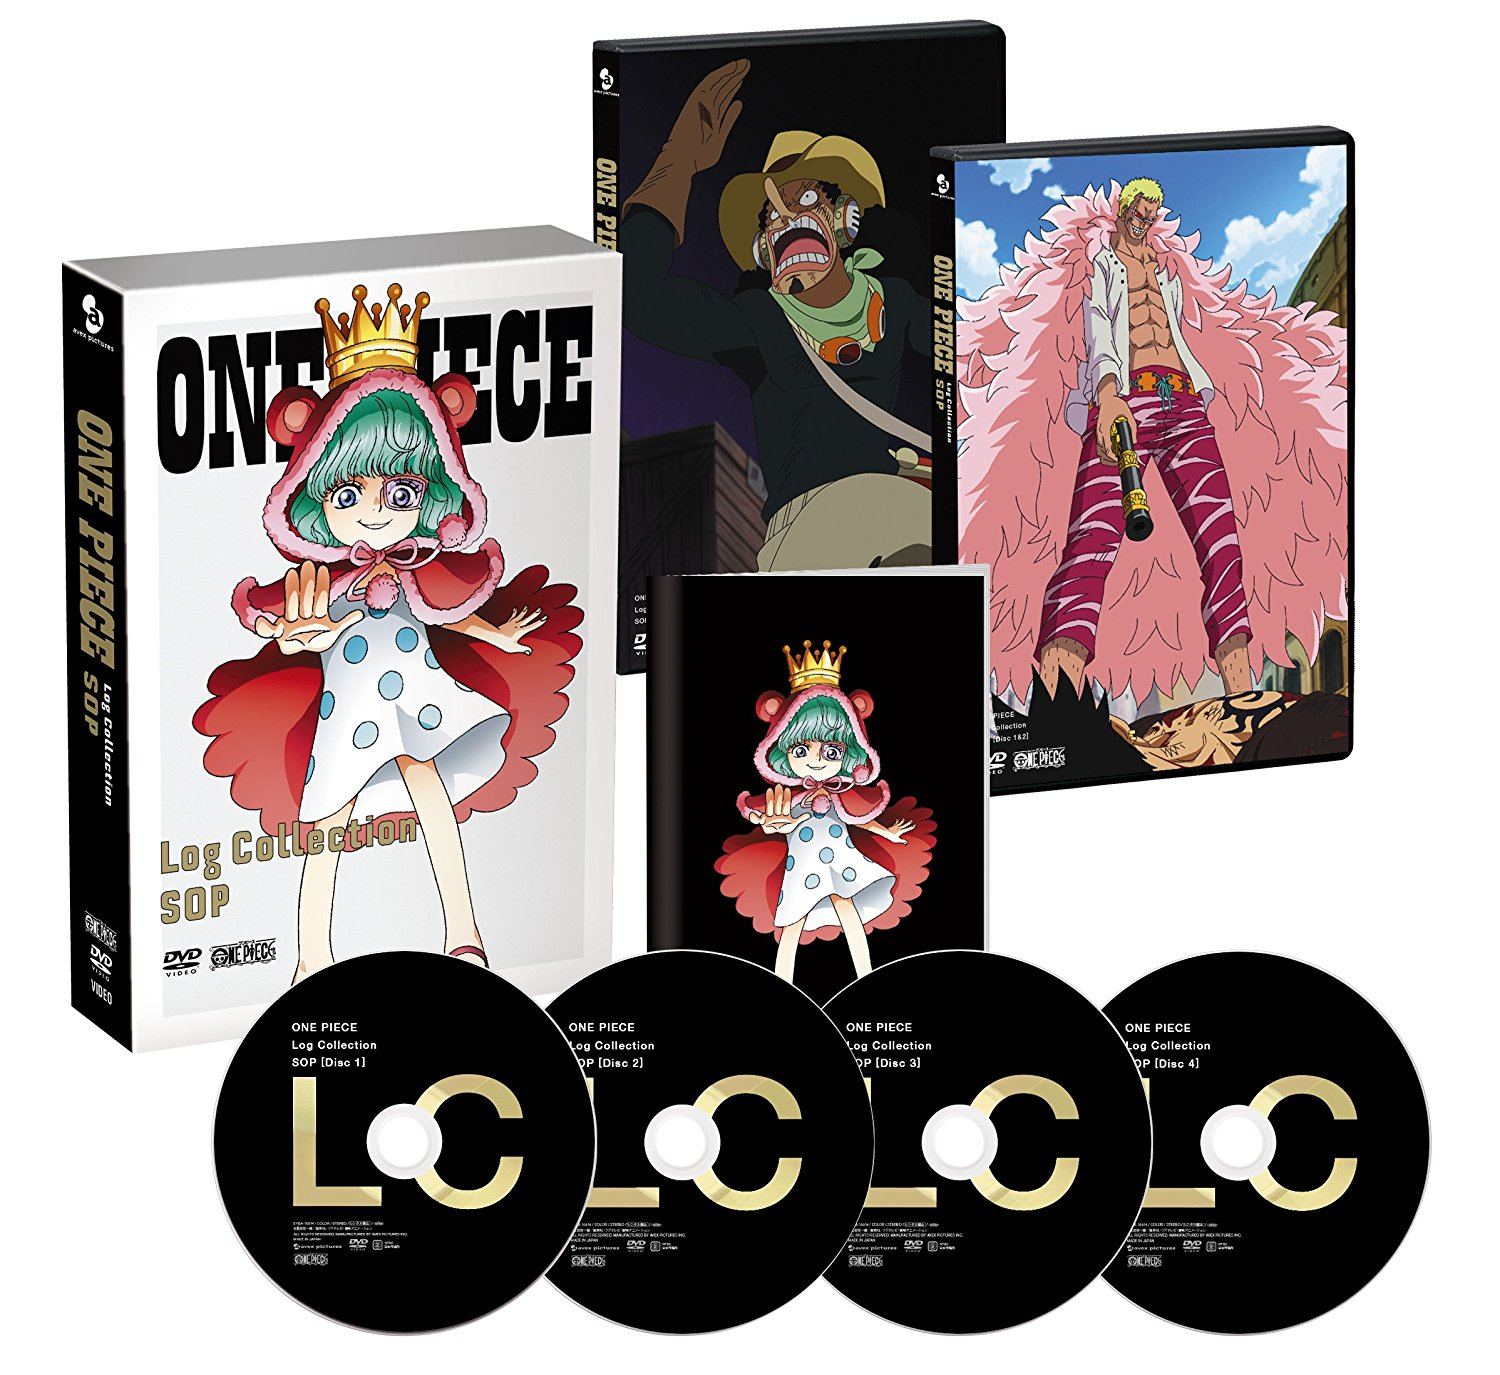 One Piece Log Collection Sop